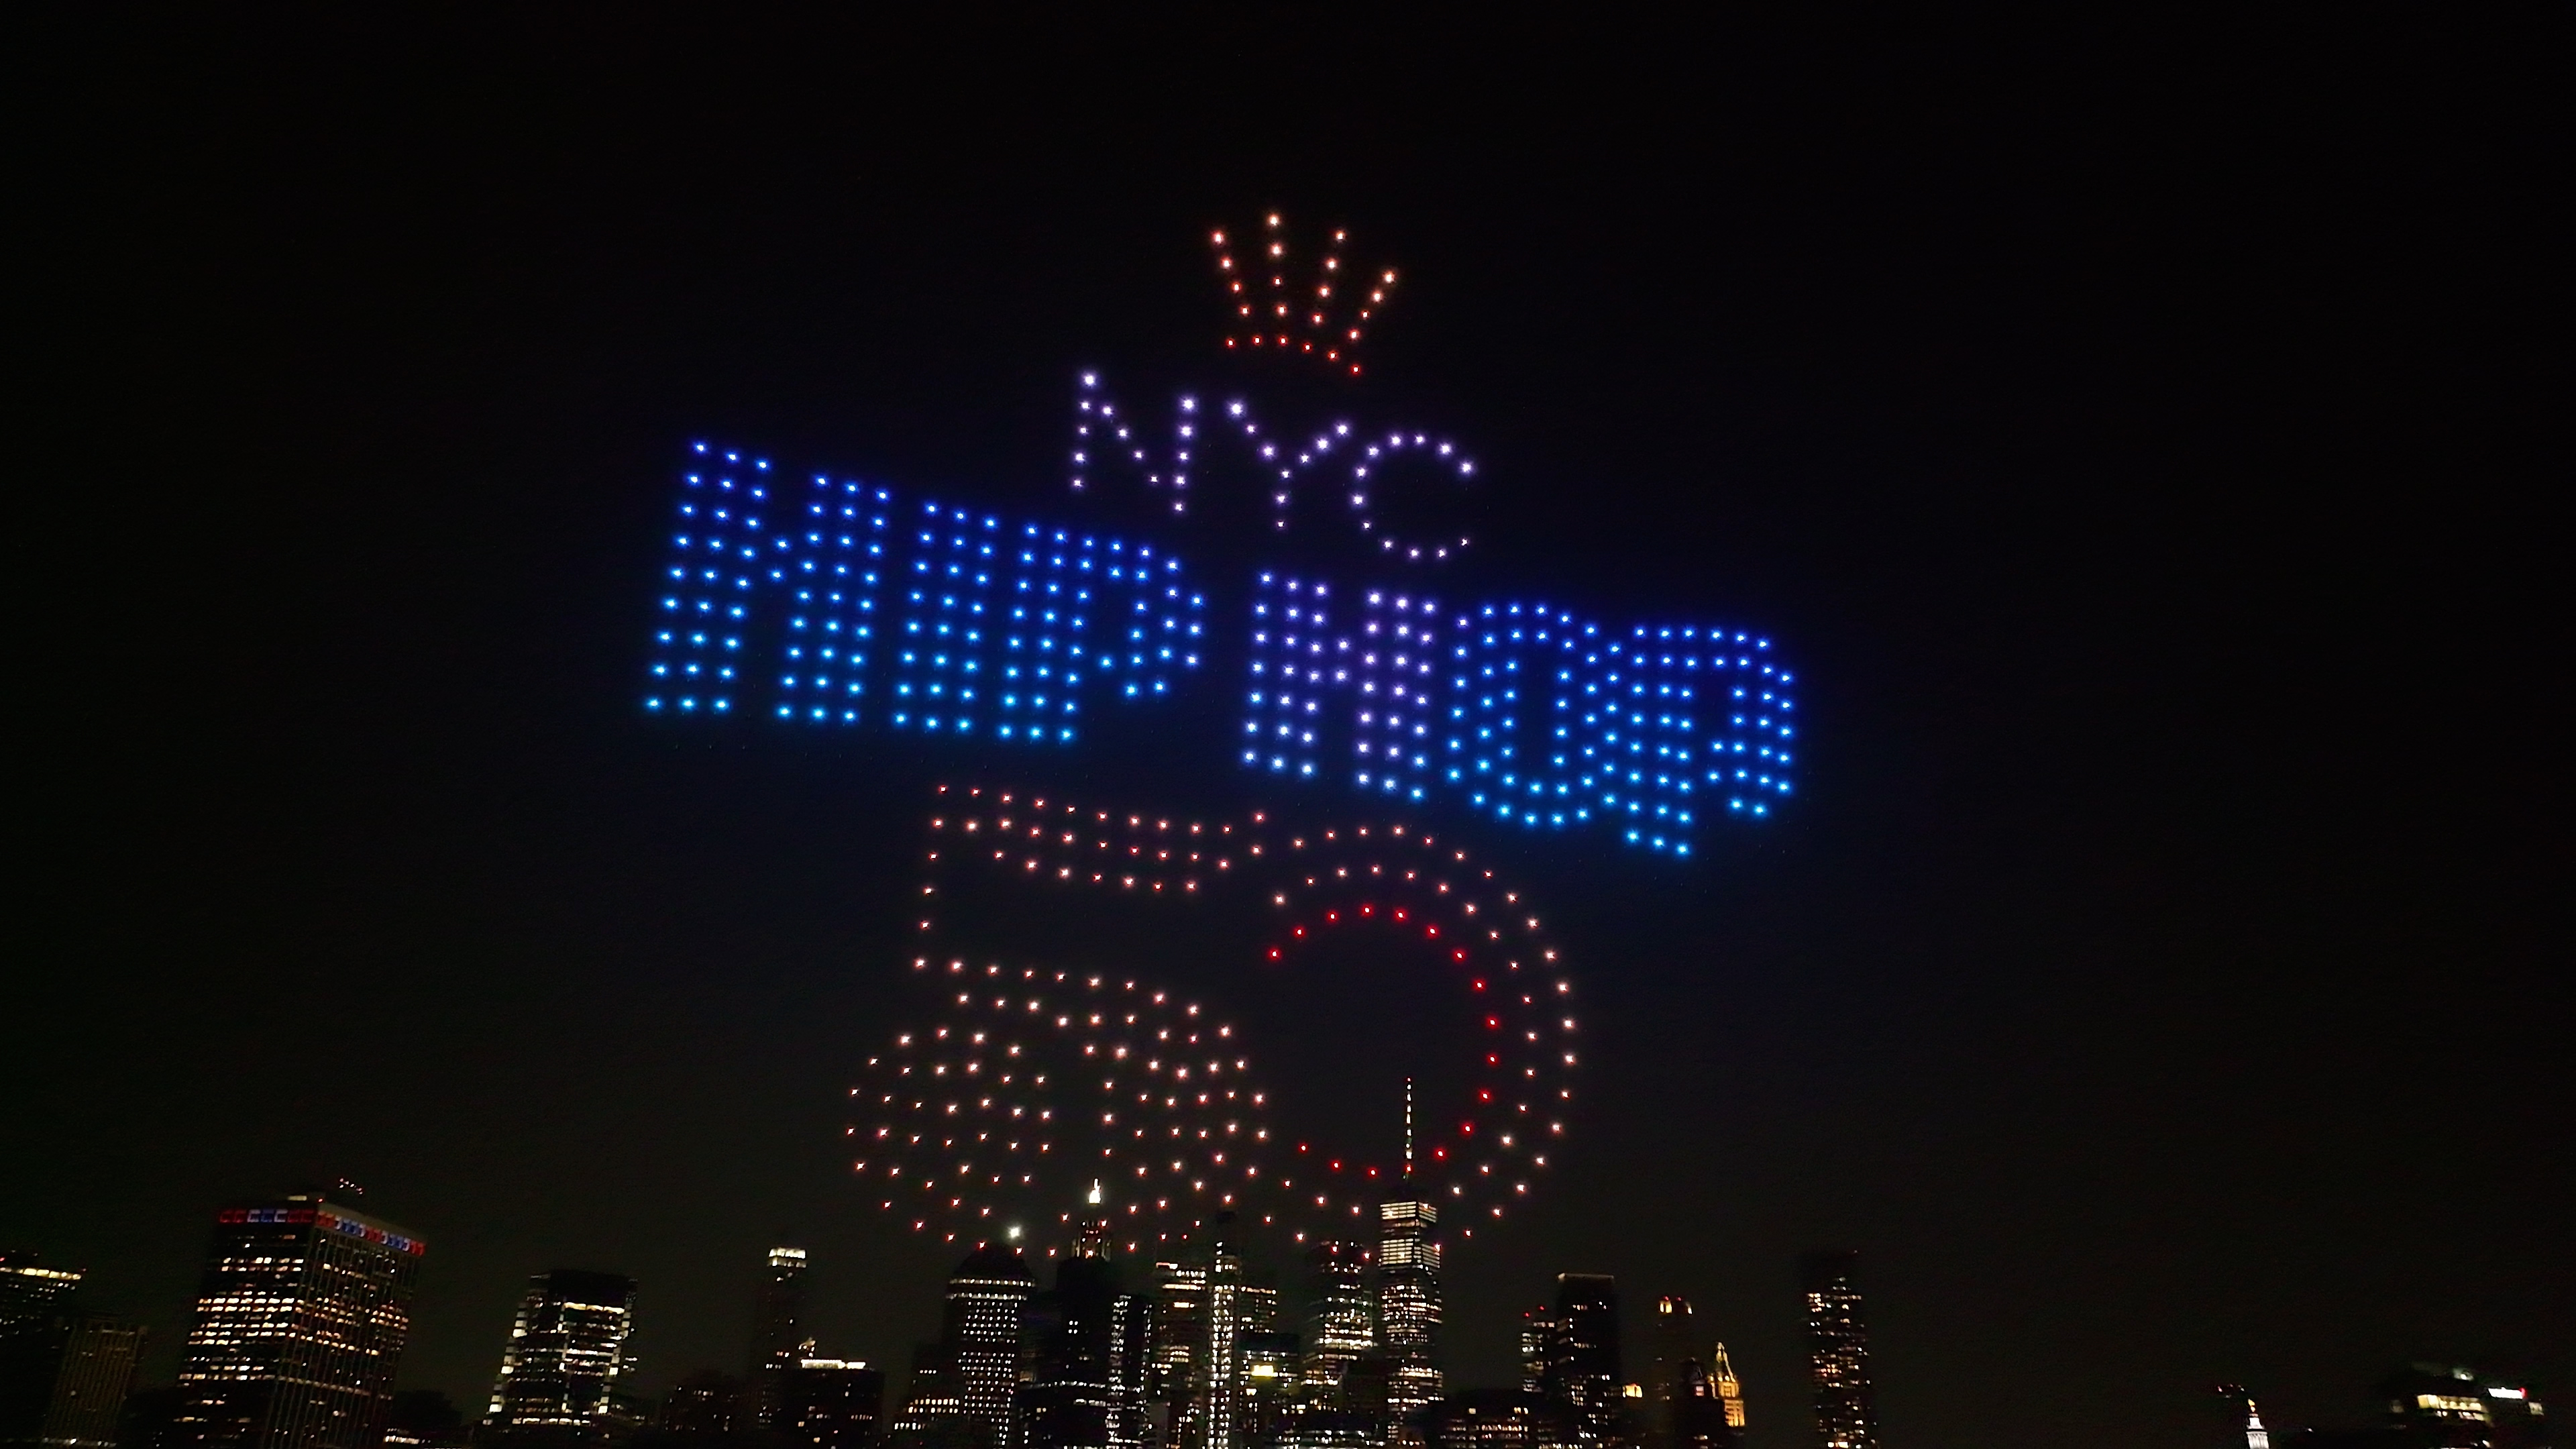 HH50 logo in sky overNYC in drone light show